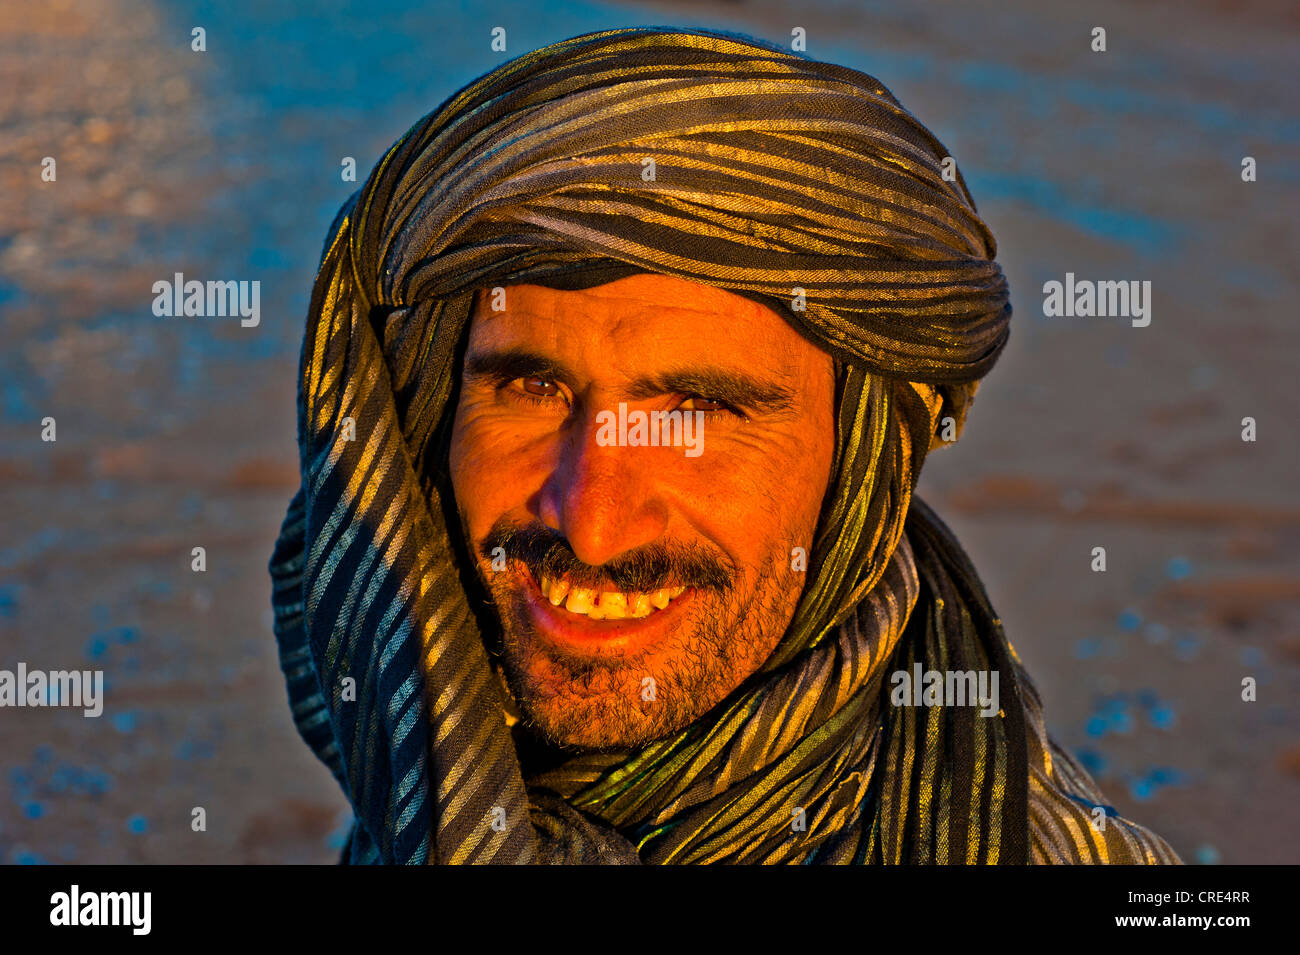 Portrait, friendly Berber man wearing a black and gold turban in the evening light, Merzouga, southern Morocco, Morocco, Africa Stock Photo